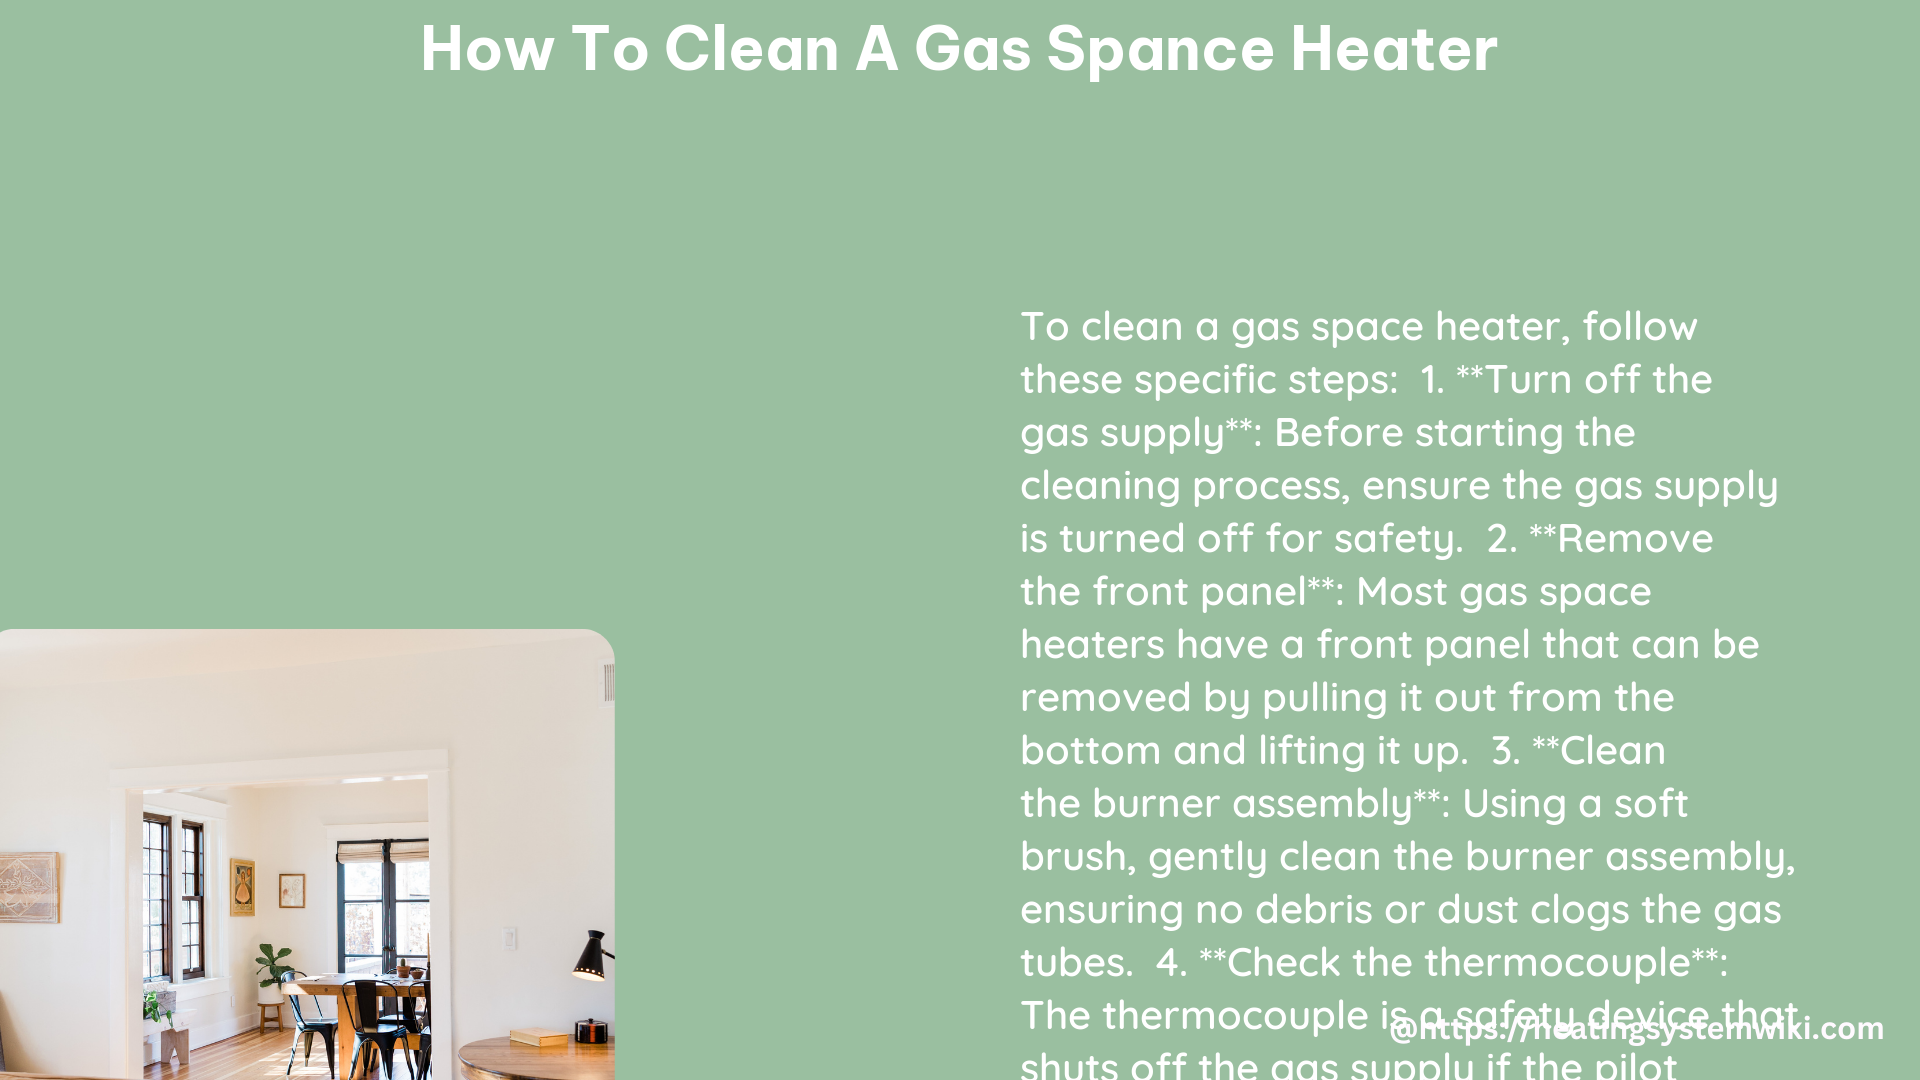 how to Clean a Gas Spance Heater